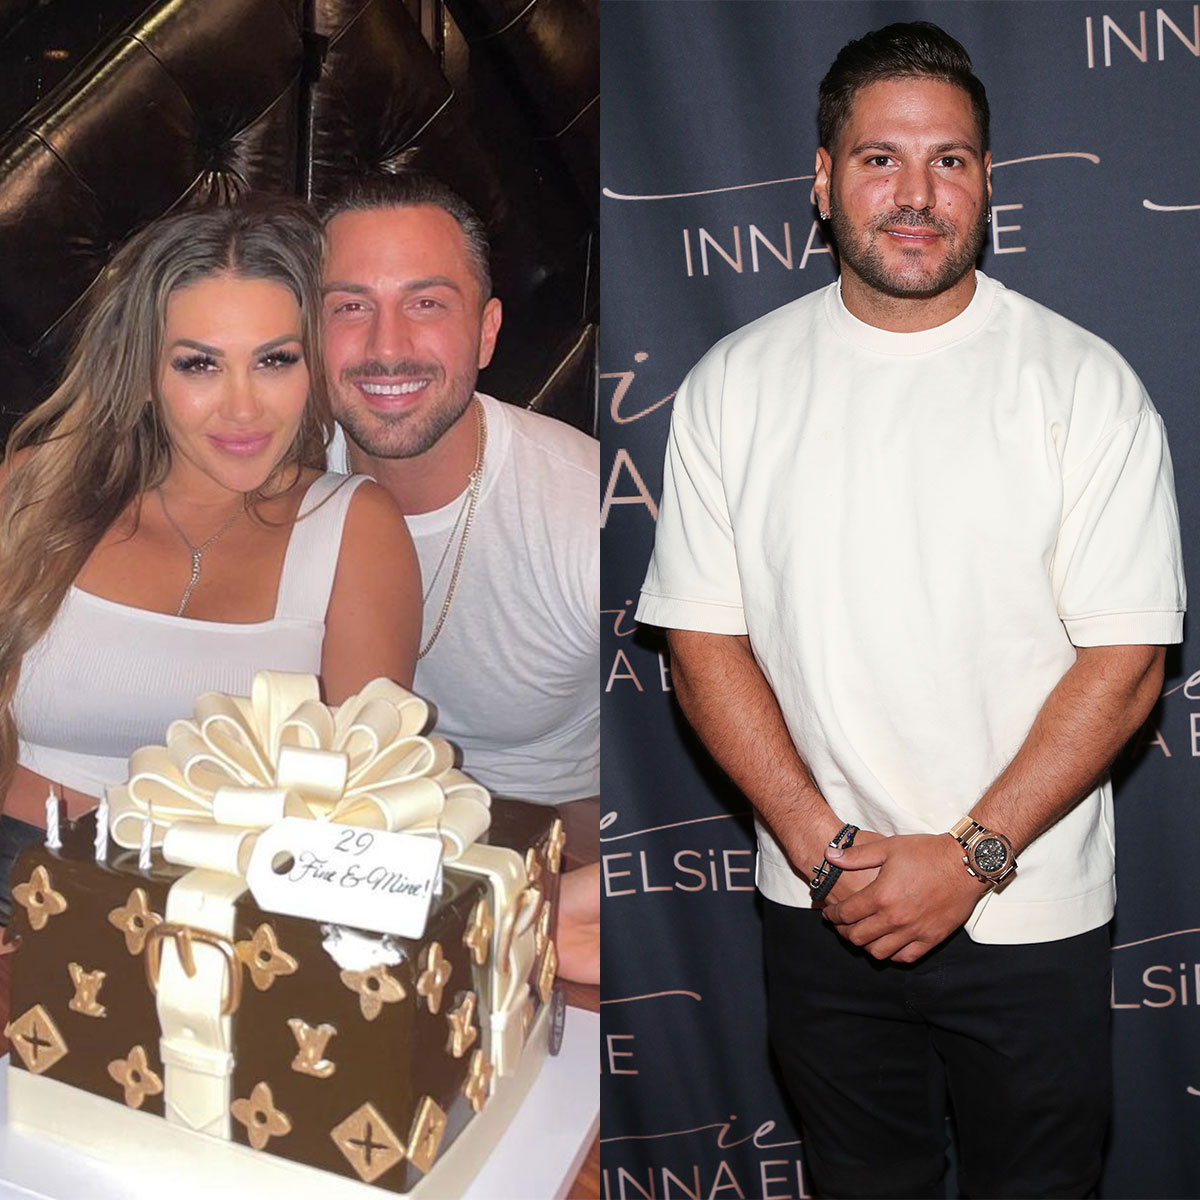 Ronnie Ortiz-Magro’s Ex Jen Harley Is Pregnant with Baby No. 3